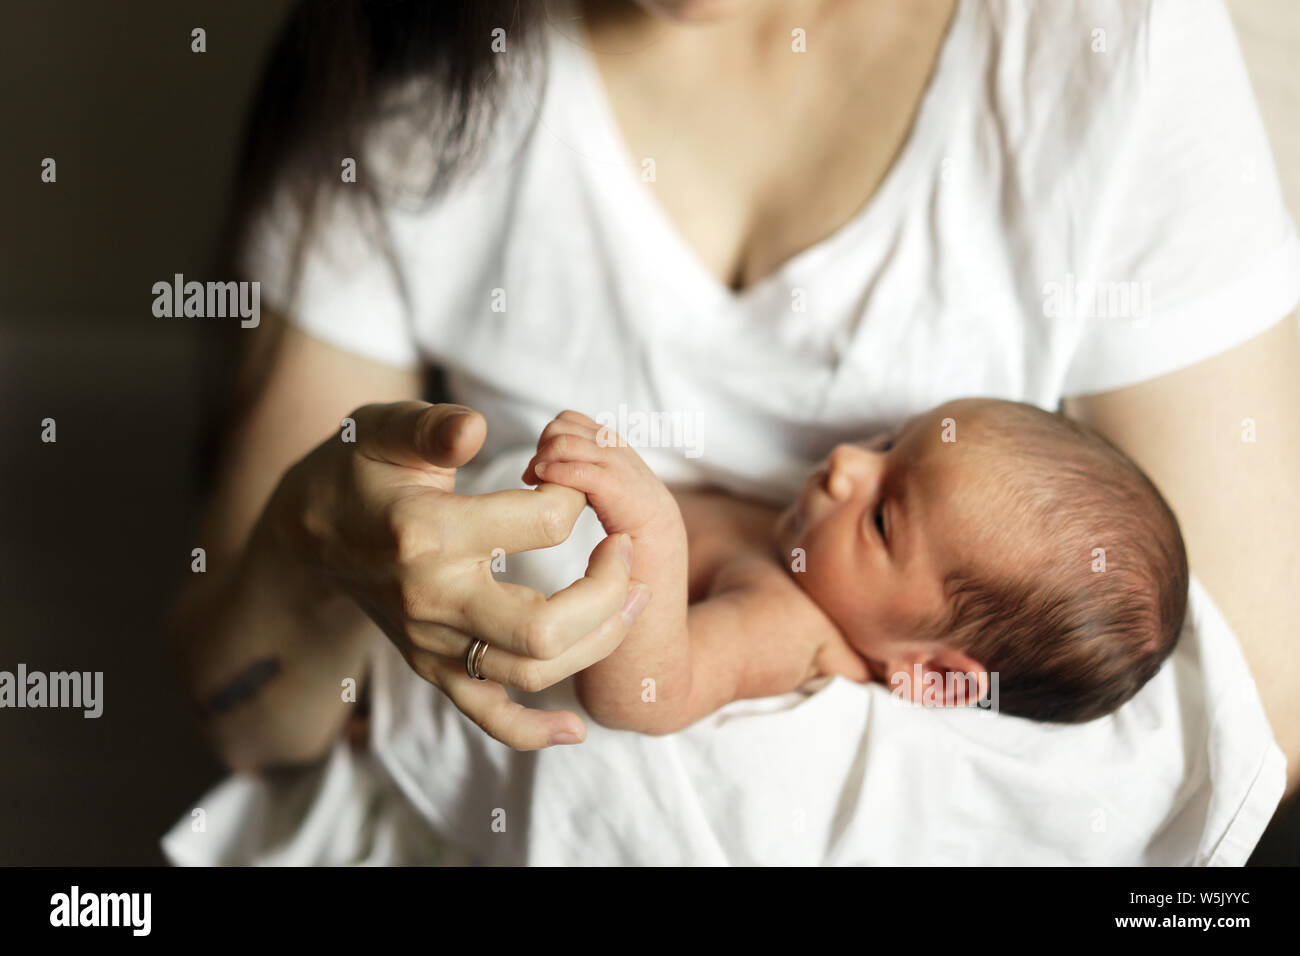 Little hand of a newborn in a large hand of mother. Stock Photo